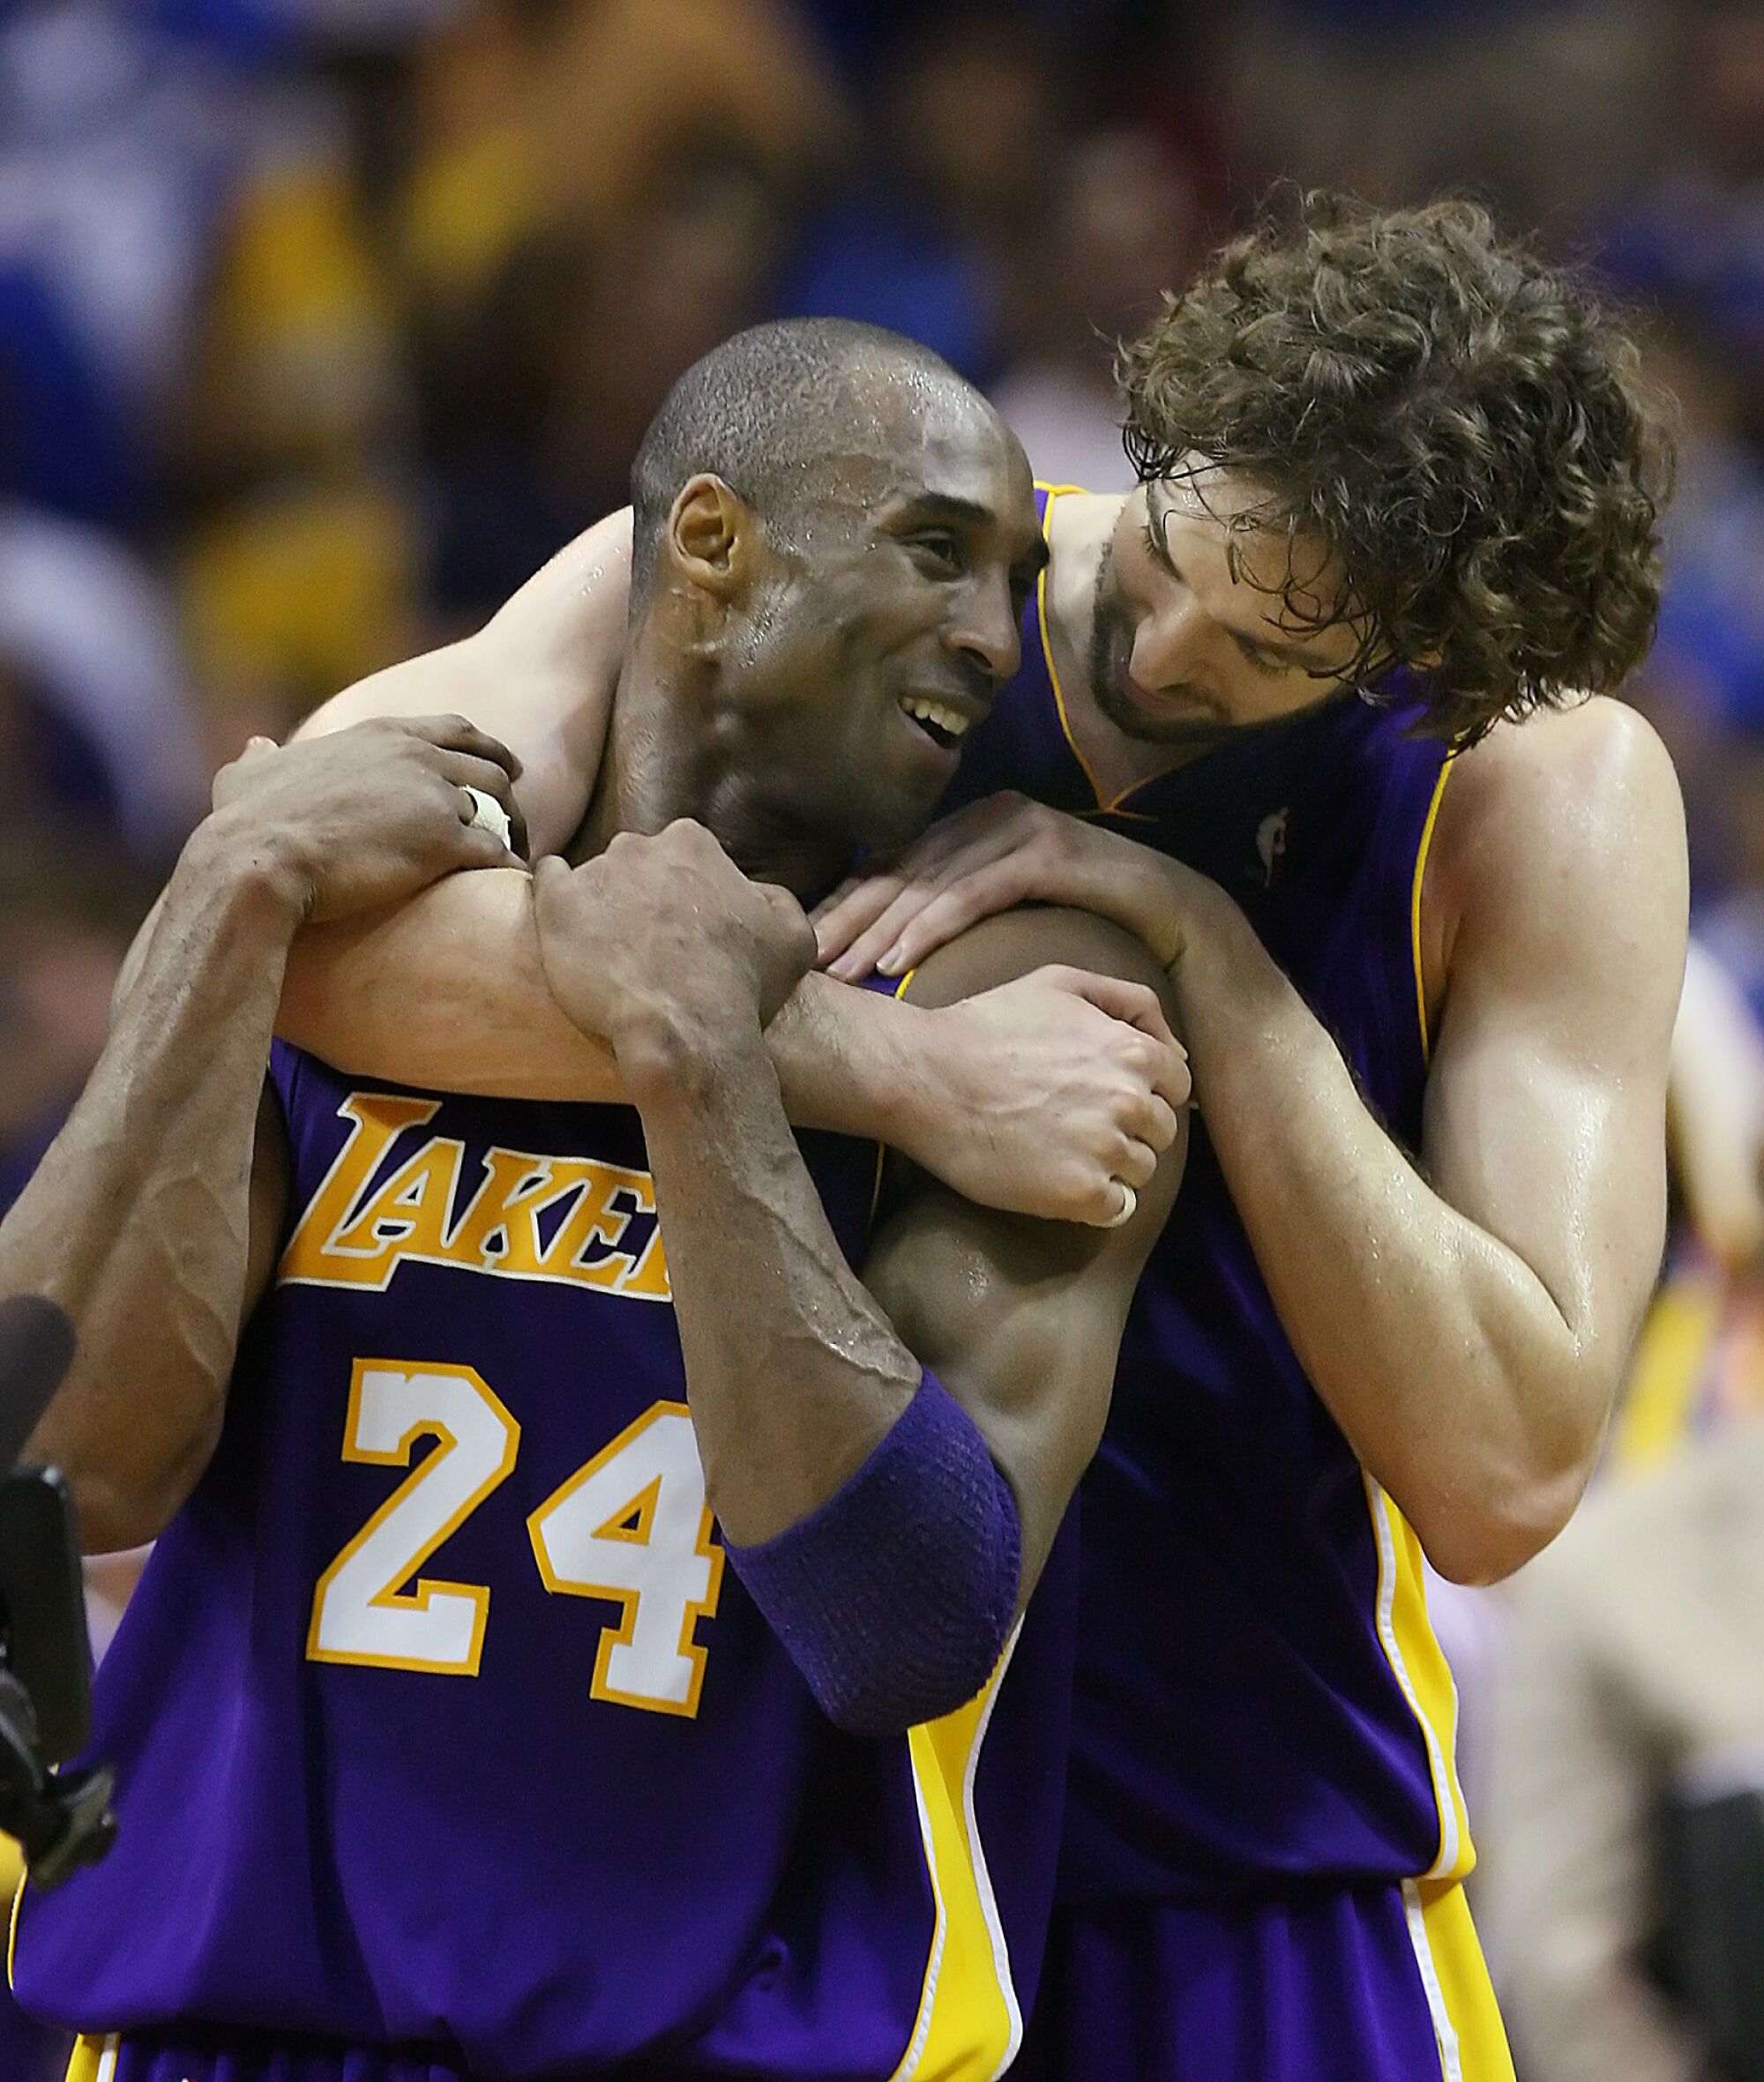 Pau Gasol and Kobe Bryant share a warm embrace at center court as they realize victory is imminent over the Magic.